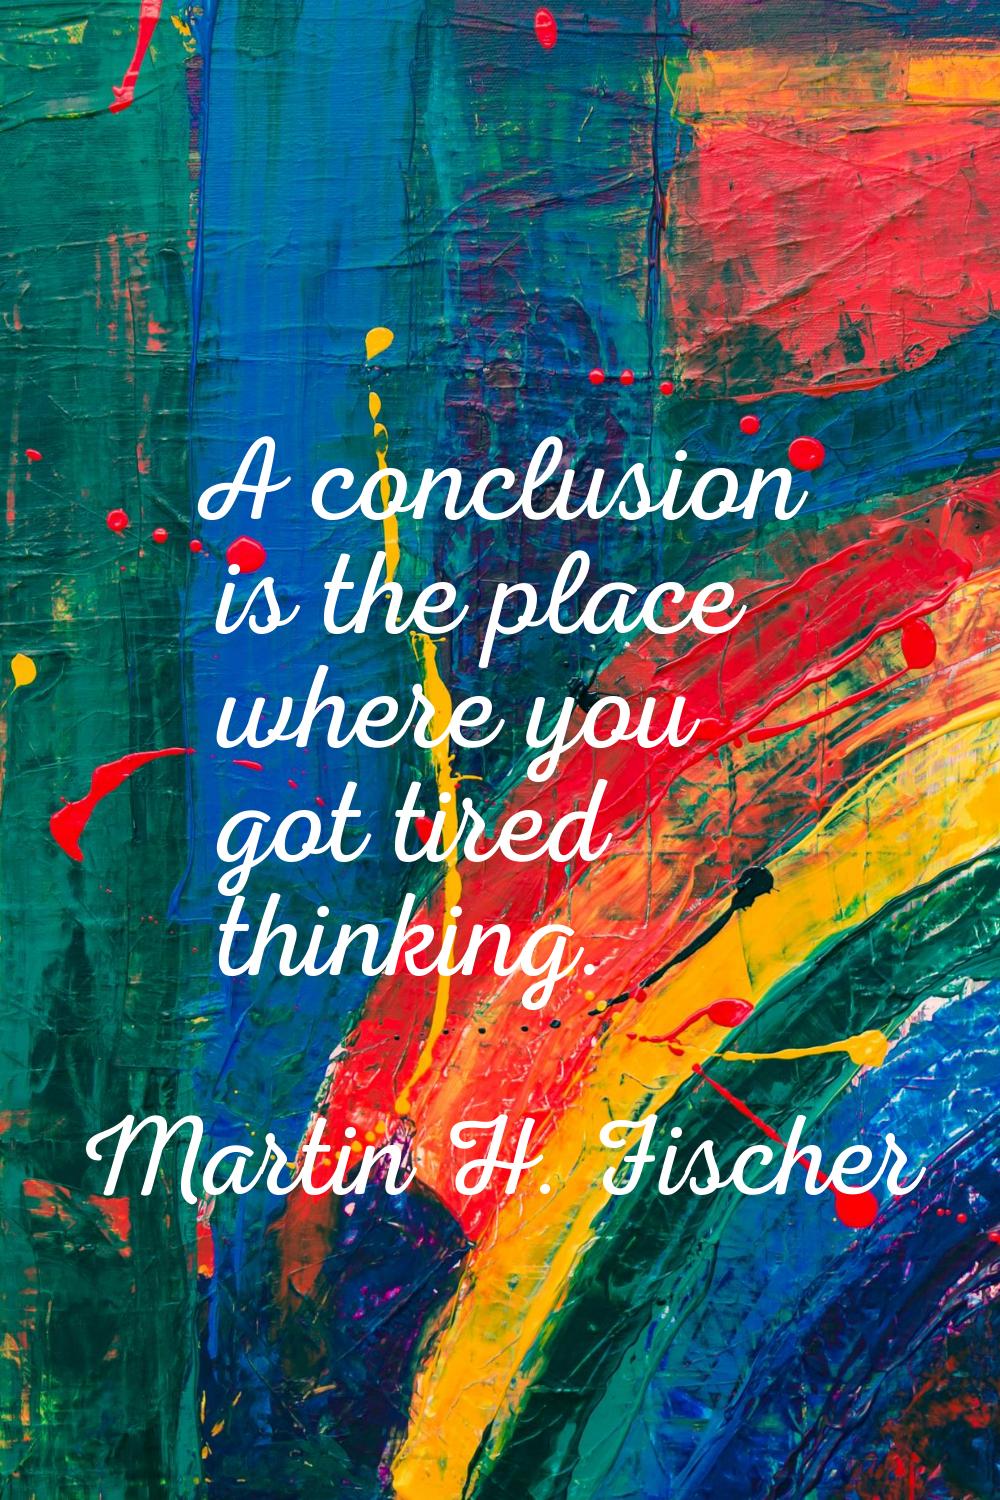 A conclusion is the place where you got tired thinking.